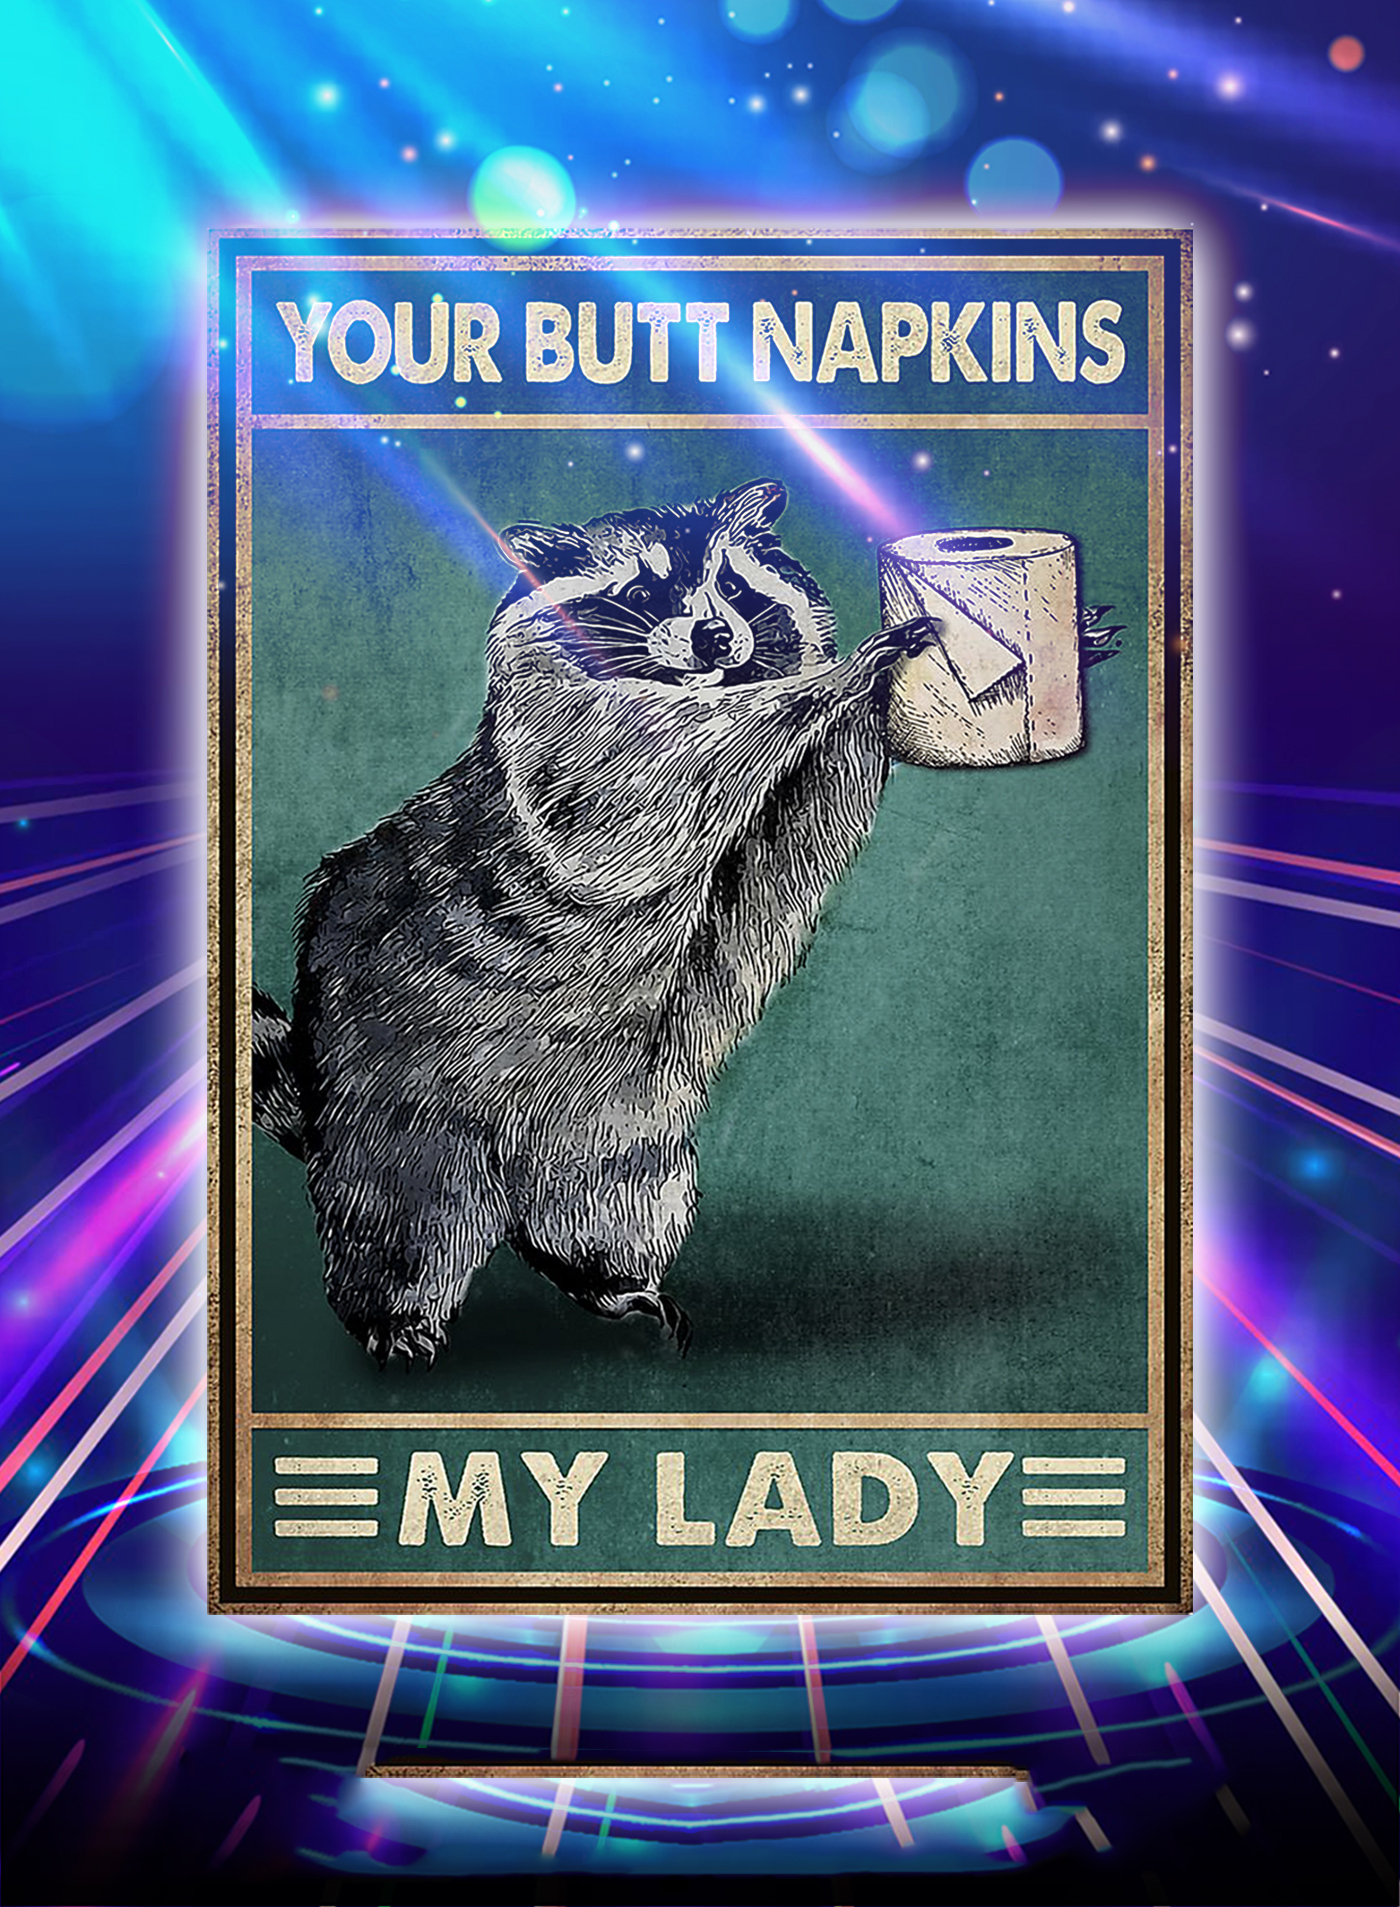 Racoon your butt napkins my lady poster - A1